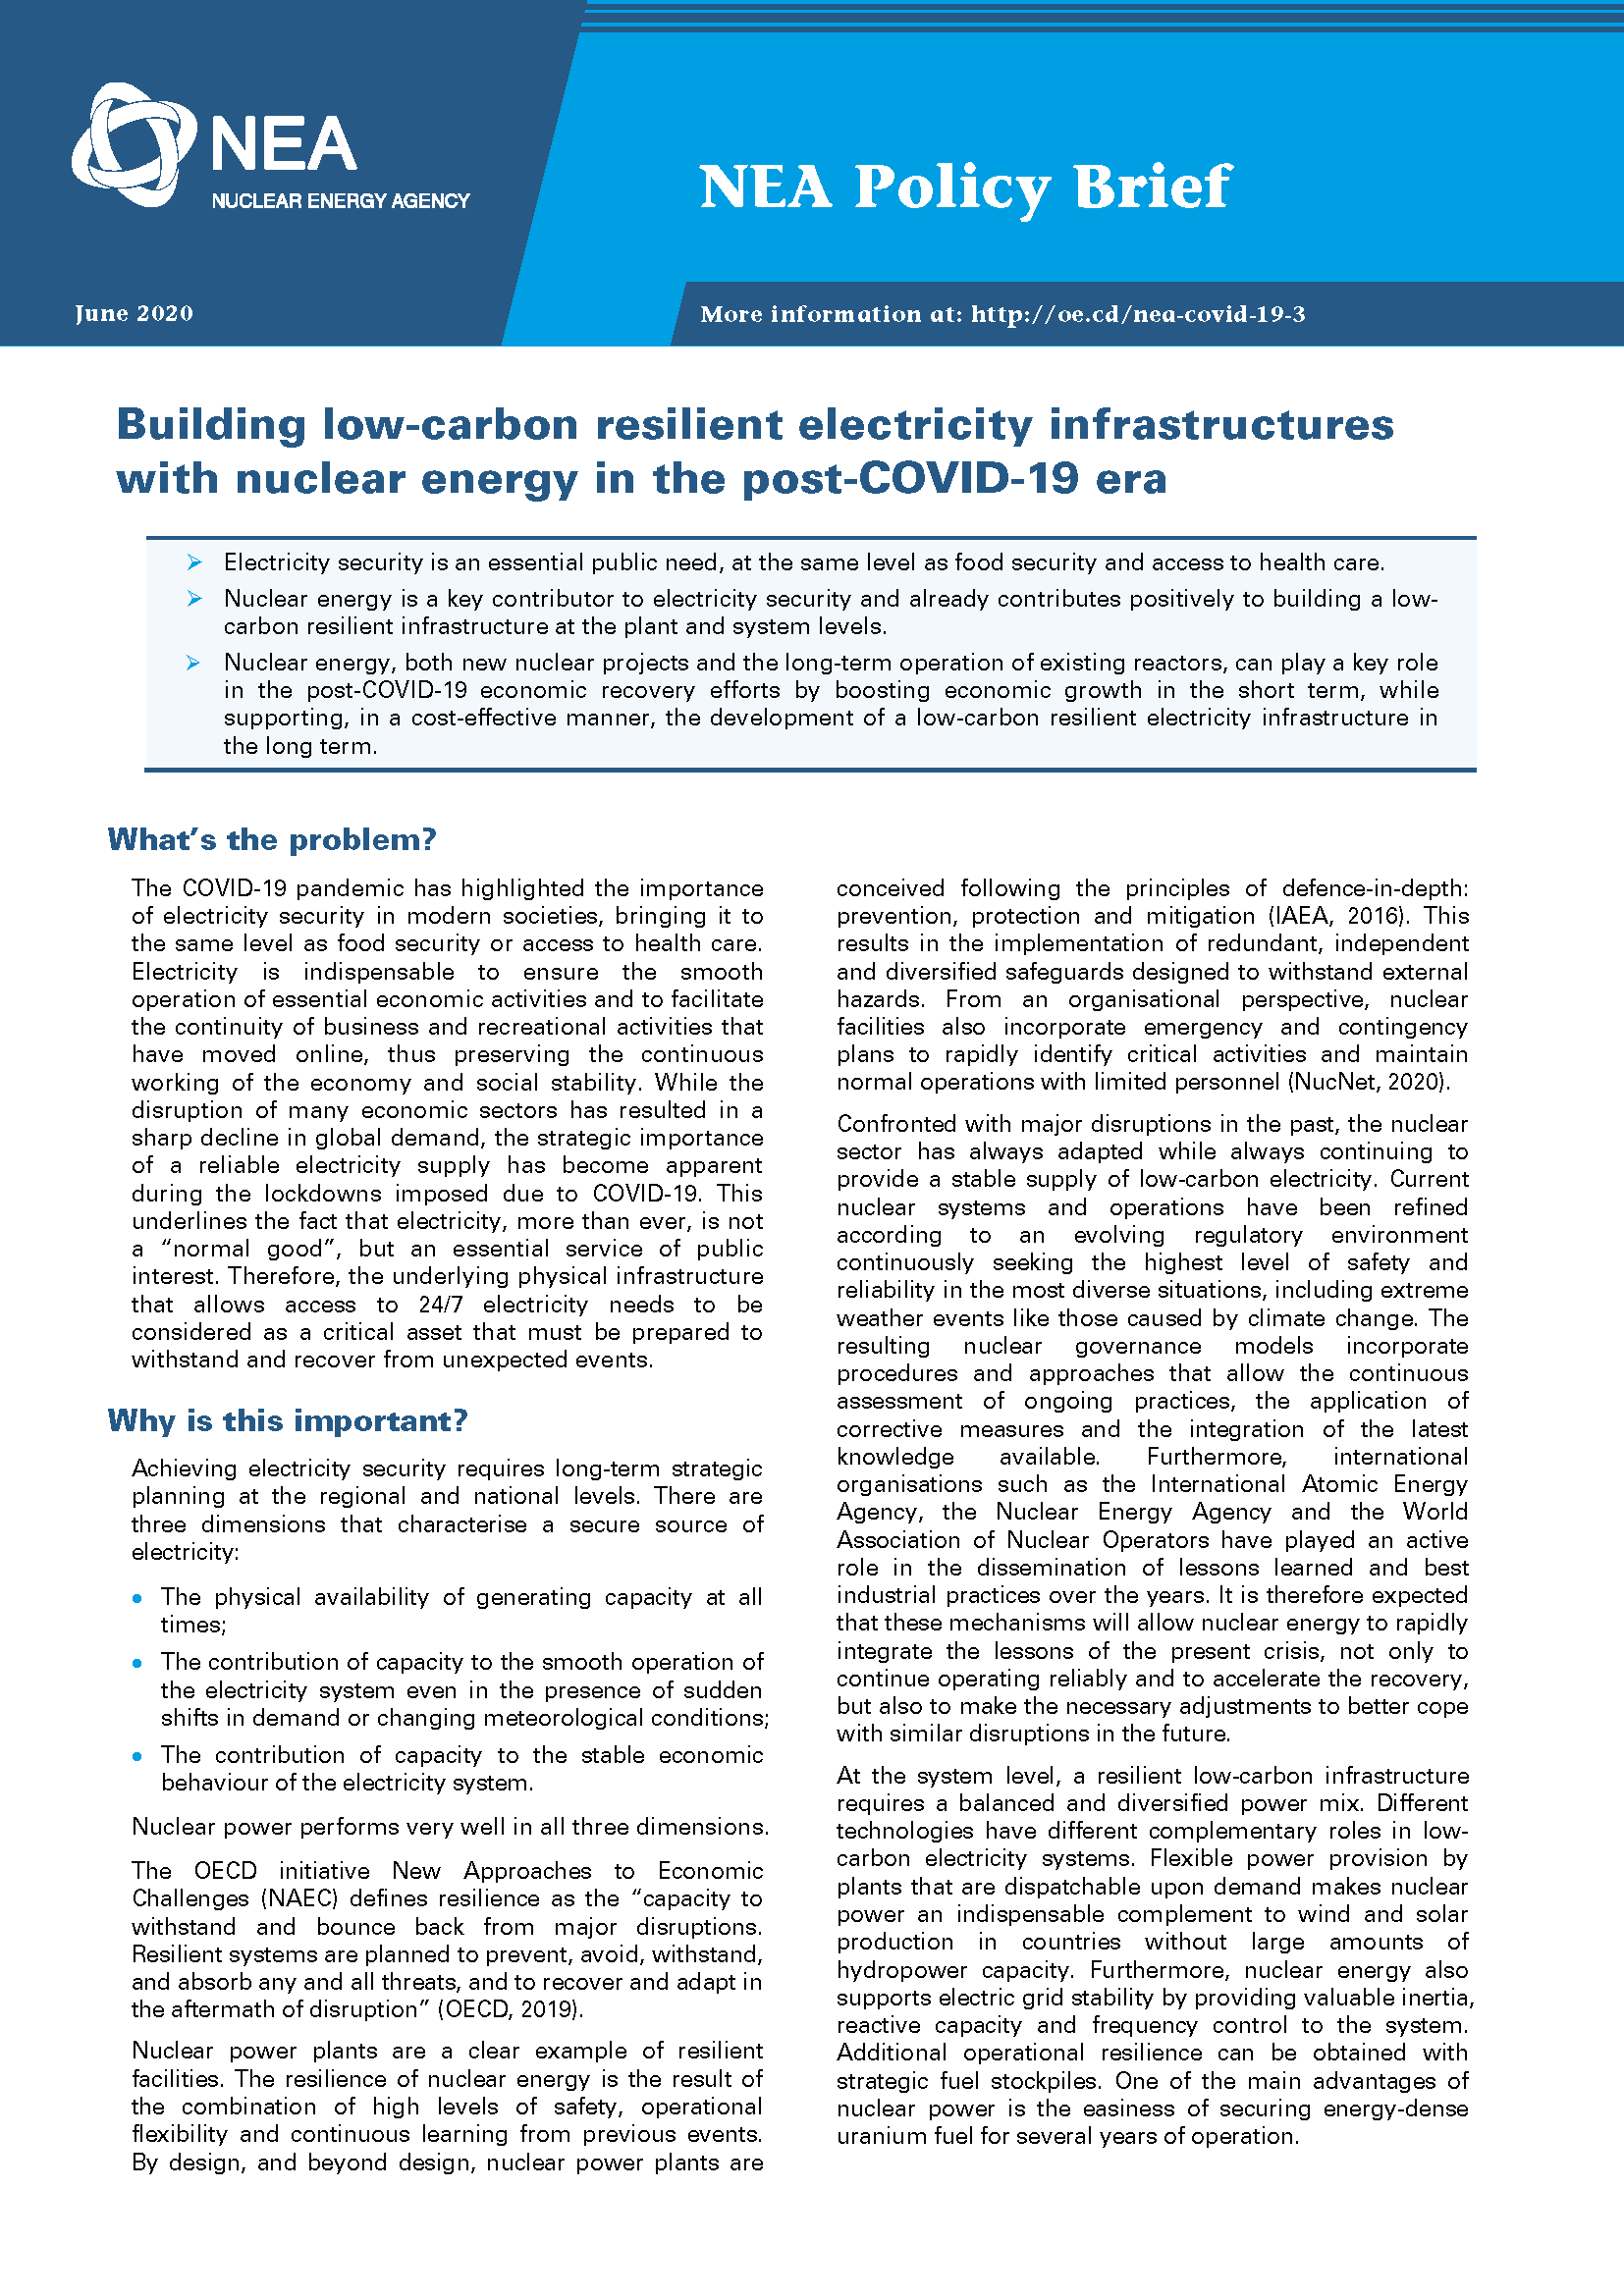 Building low-carbon resilient electricity infrastructures
				with nuclear energy in the post-COVID-19 era